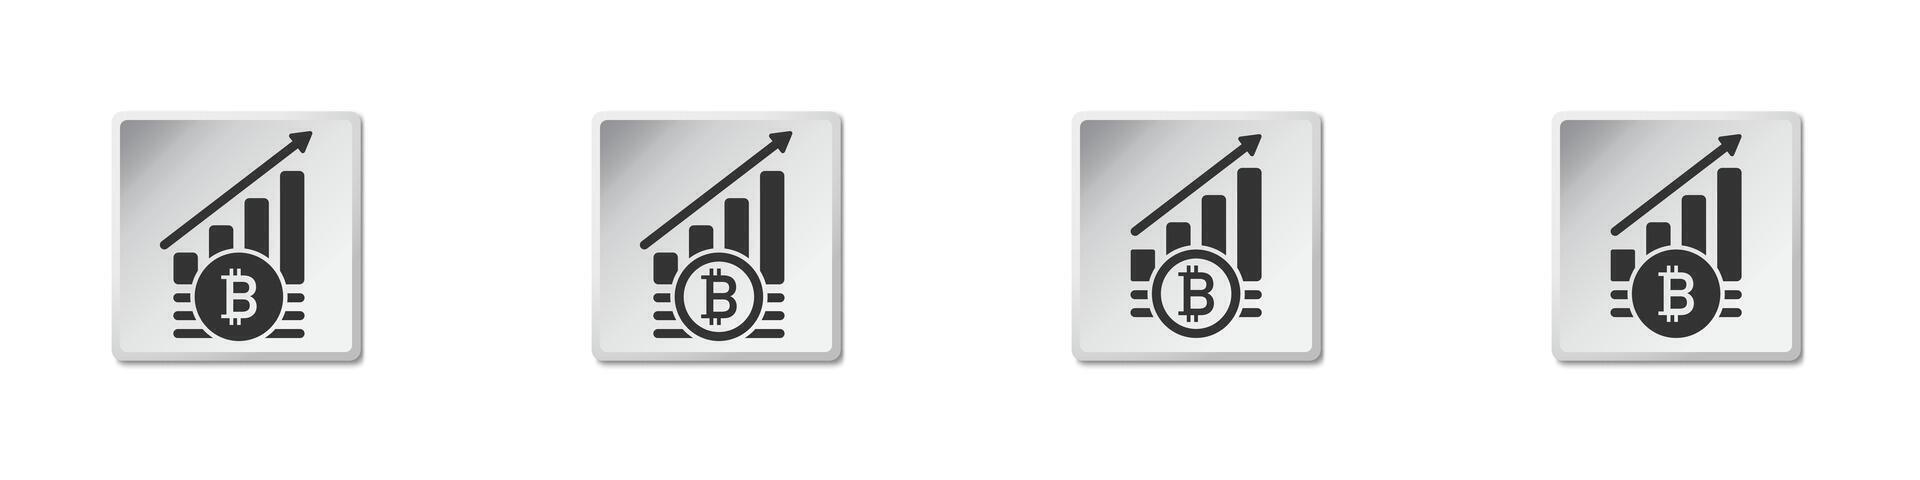 Bitcoin increase symbol. Cryptocurrency growth icon. Flat vector illustration.